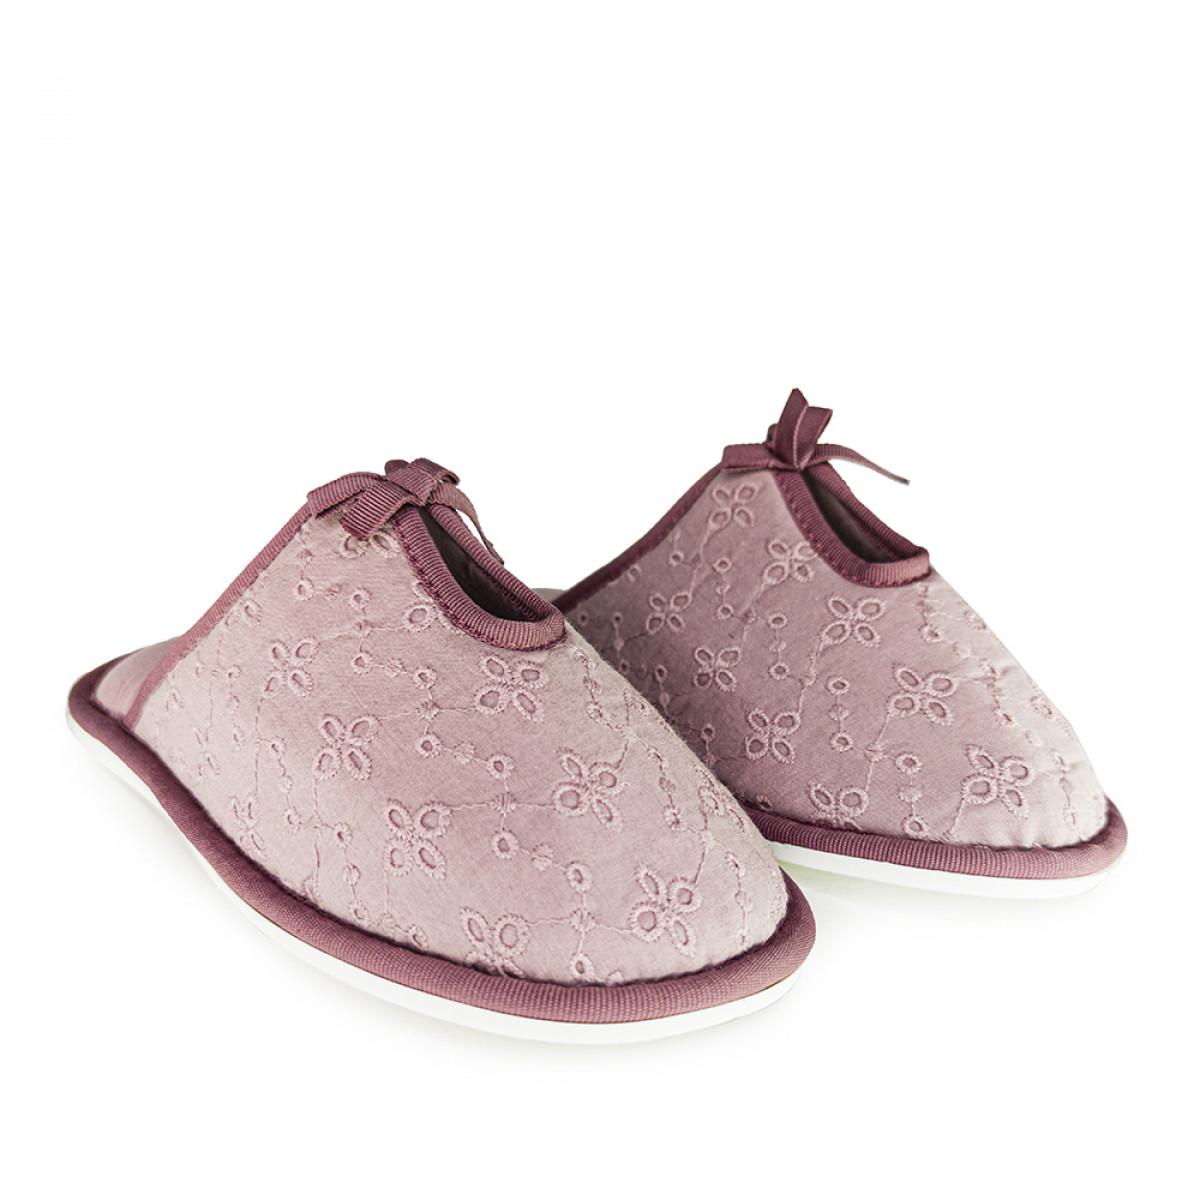 Home slippers BELLA, Pink